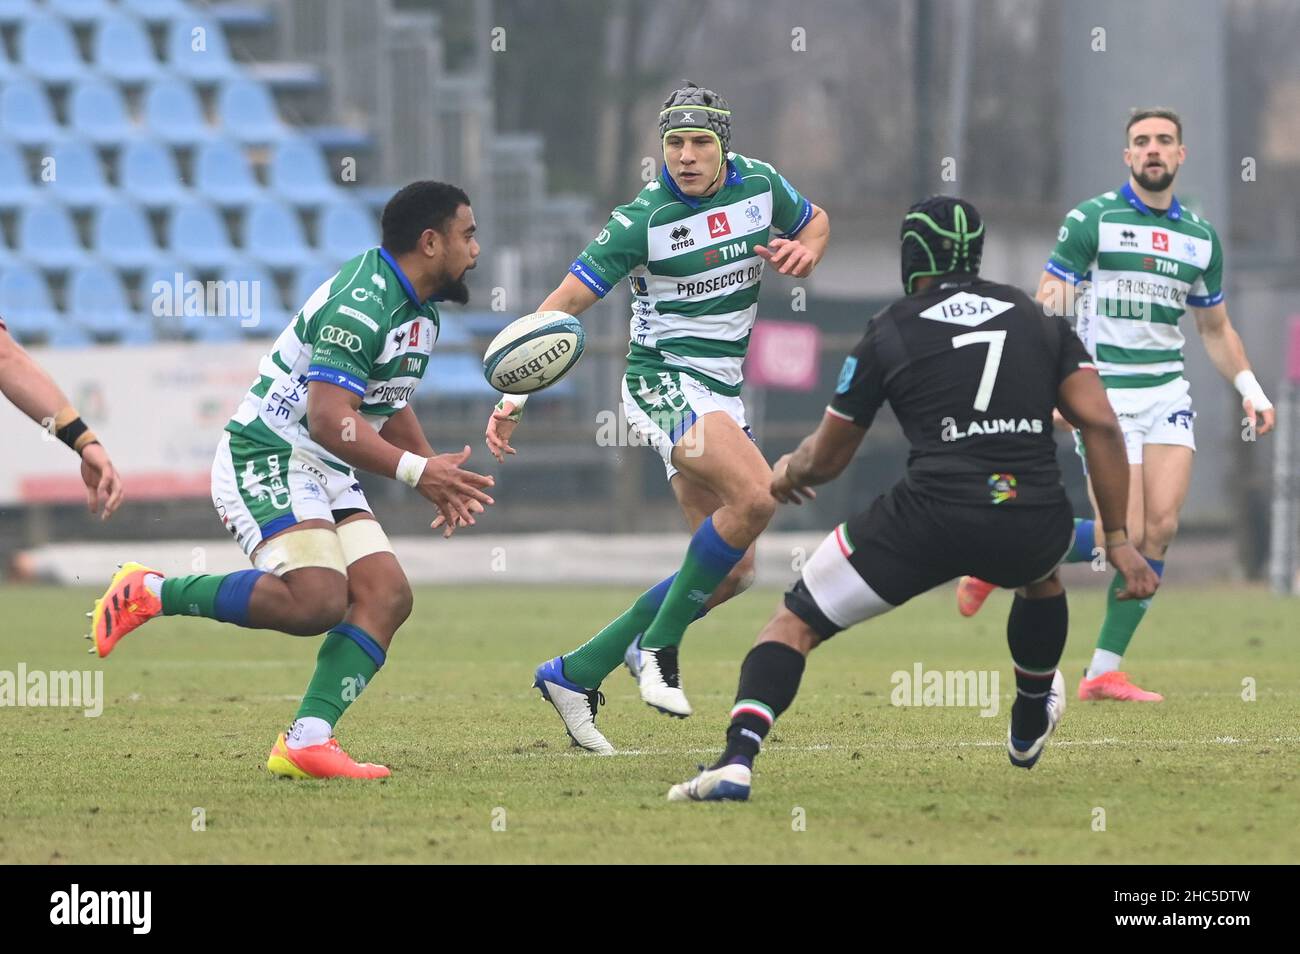 Parma, Italy. 24th Dec, 2021. Monty Ioane and Ignacio Brex (Benetton)  during Zebre Rugby Club vs Benetton Rugby, United Rugby Championship match  in Parma, Italy, December 24 2021 Credit: Independent Photo Agency/Alamy